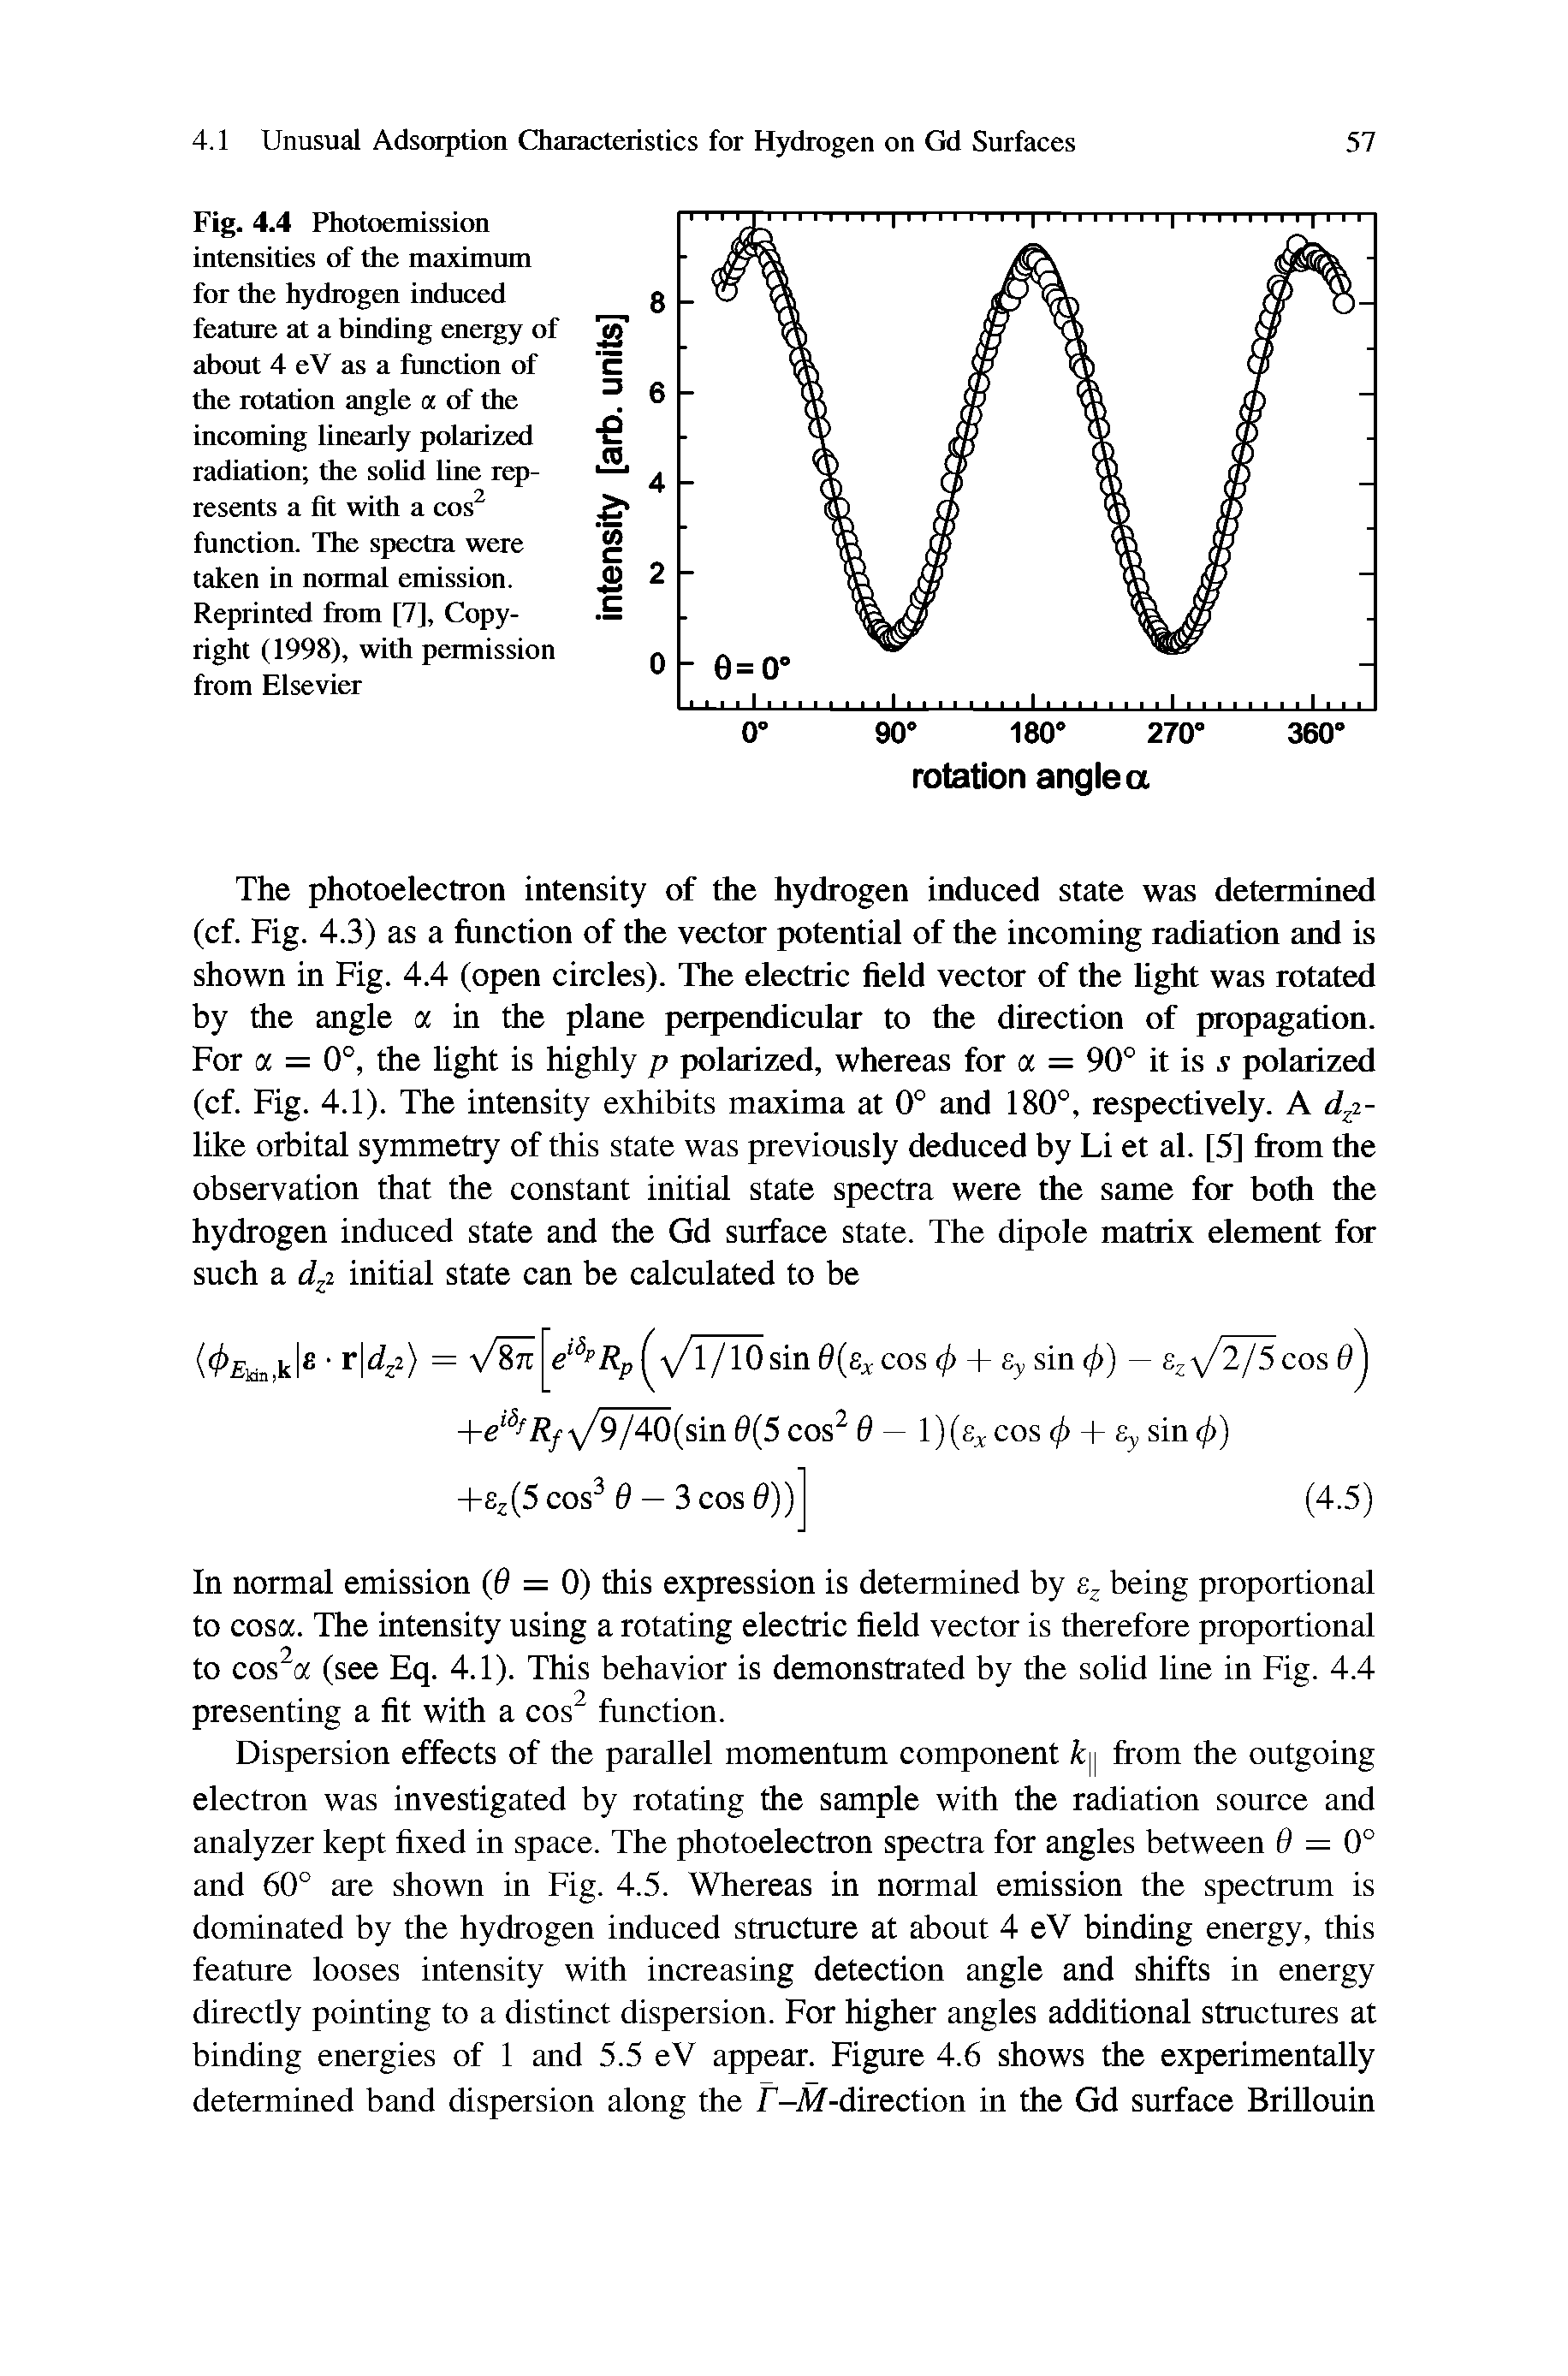 Fig. 4.4 Photoemission intensities of the maximum for the hydrogen induced feature at a binding energy of about 4 eV as a function of the rotation angle a of the incoming linearly polarized radiation the sohd line represents a fit with a cos function. The spectra were taken in normal emission. Reprinted from [7], Copyright (1998), with permission from Elsevier...